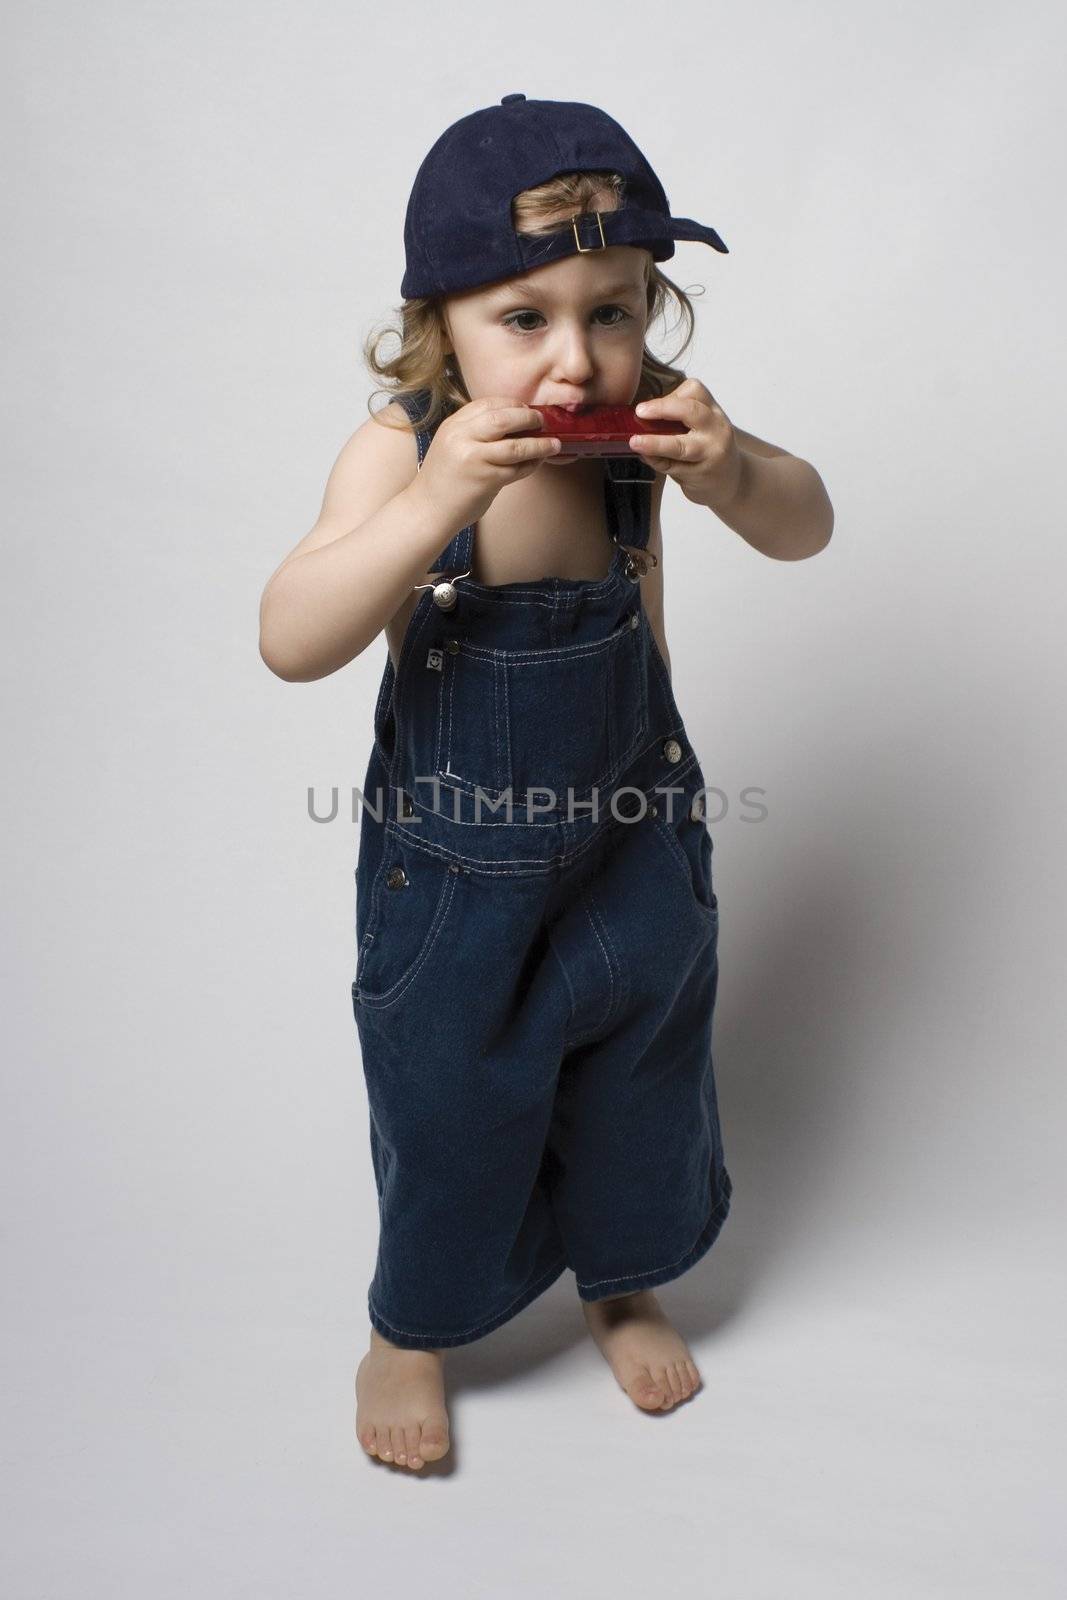 Two year old boy playing harmonica on white background